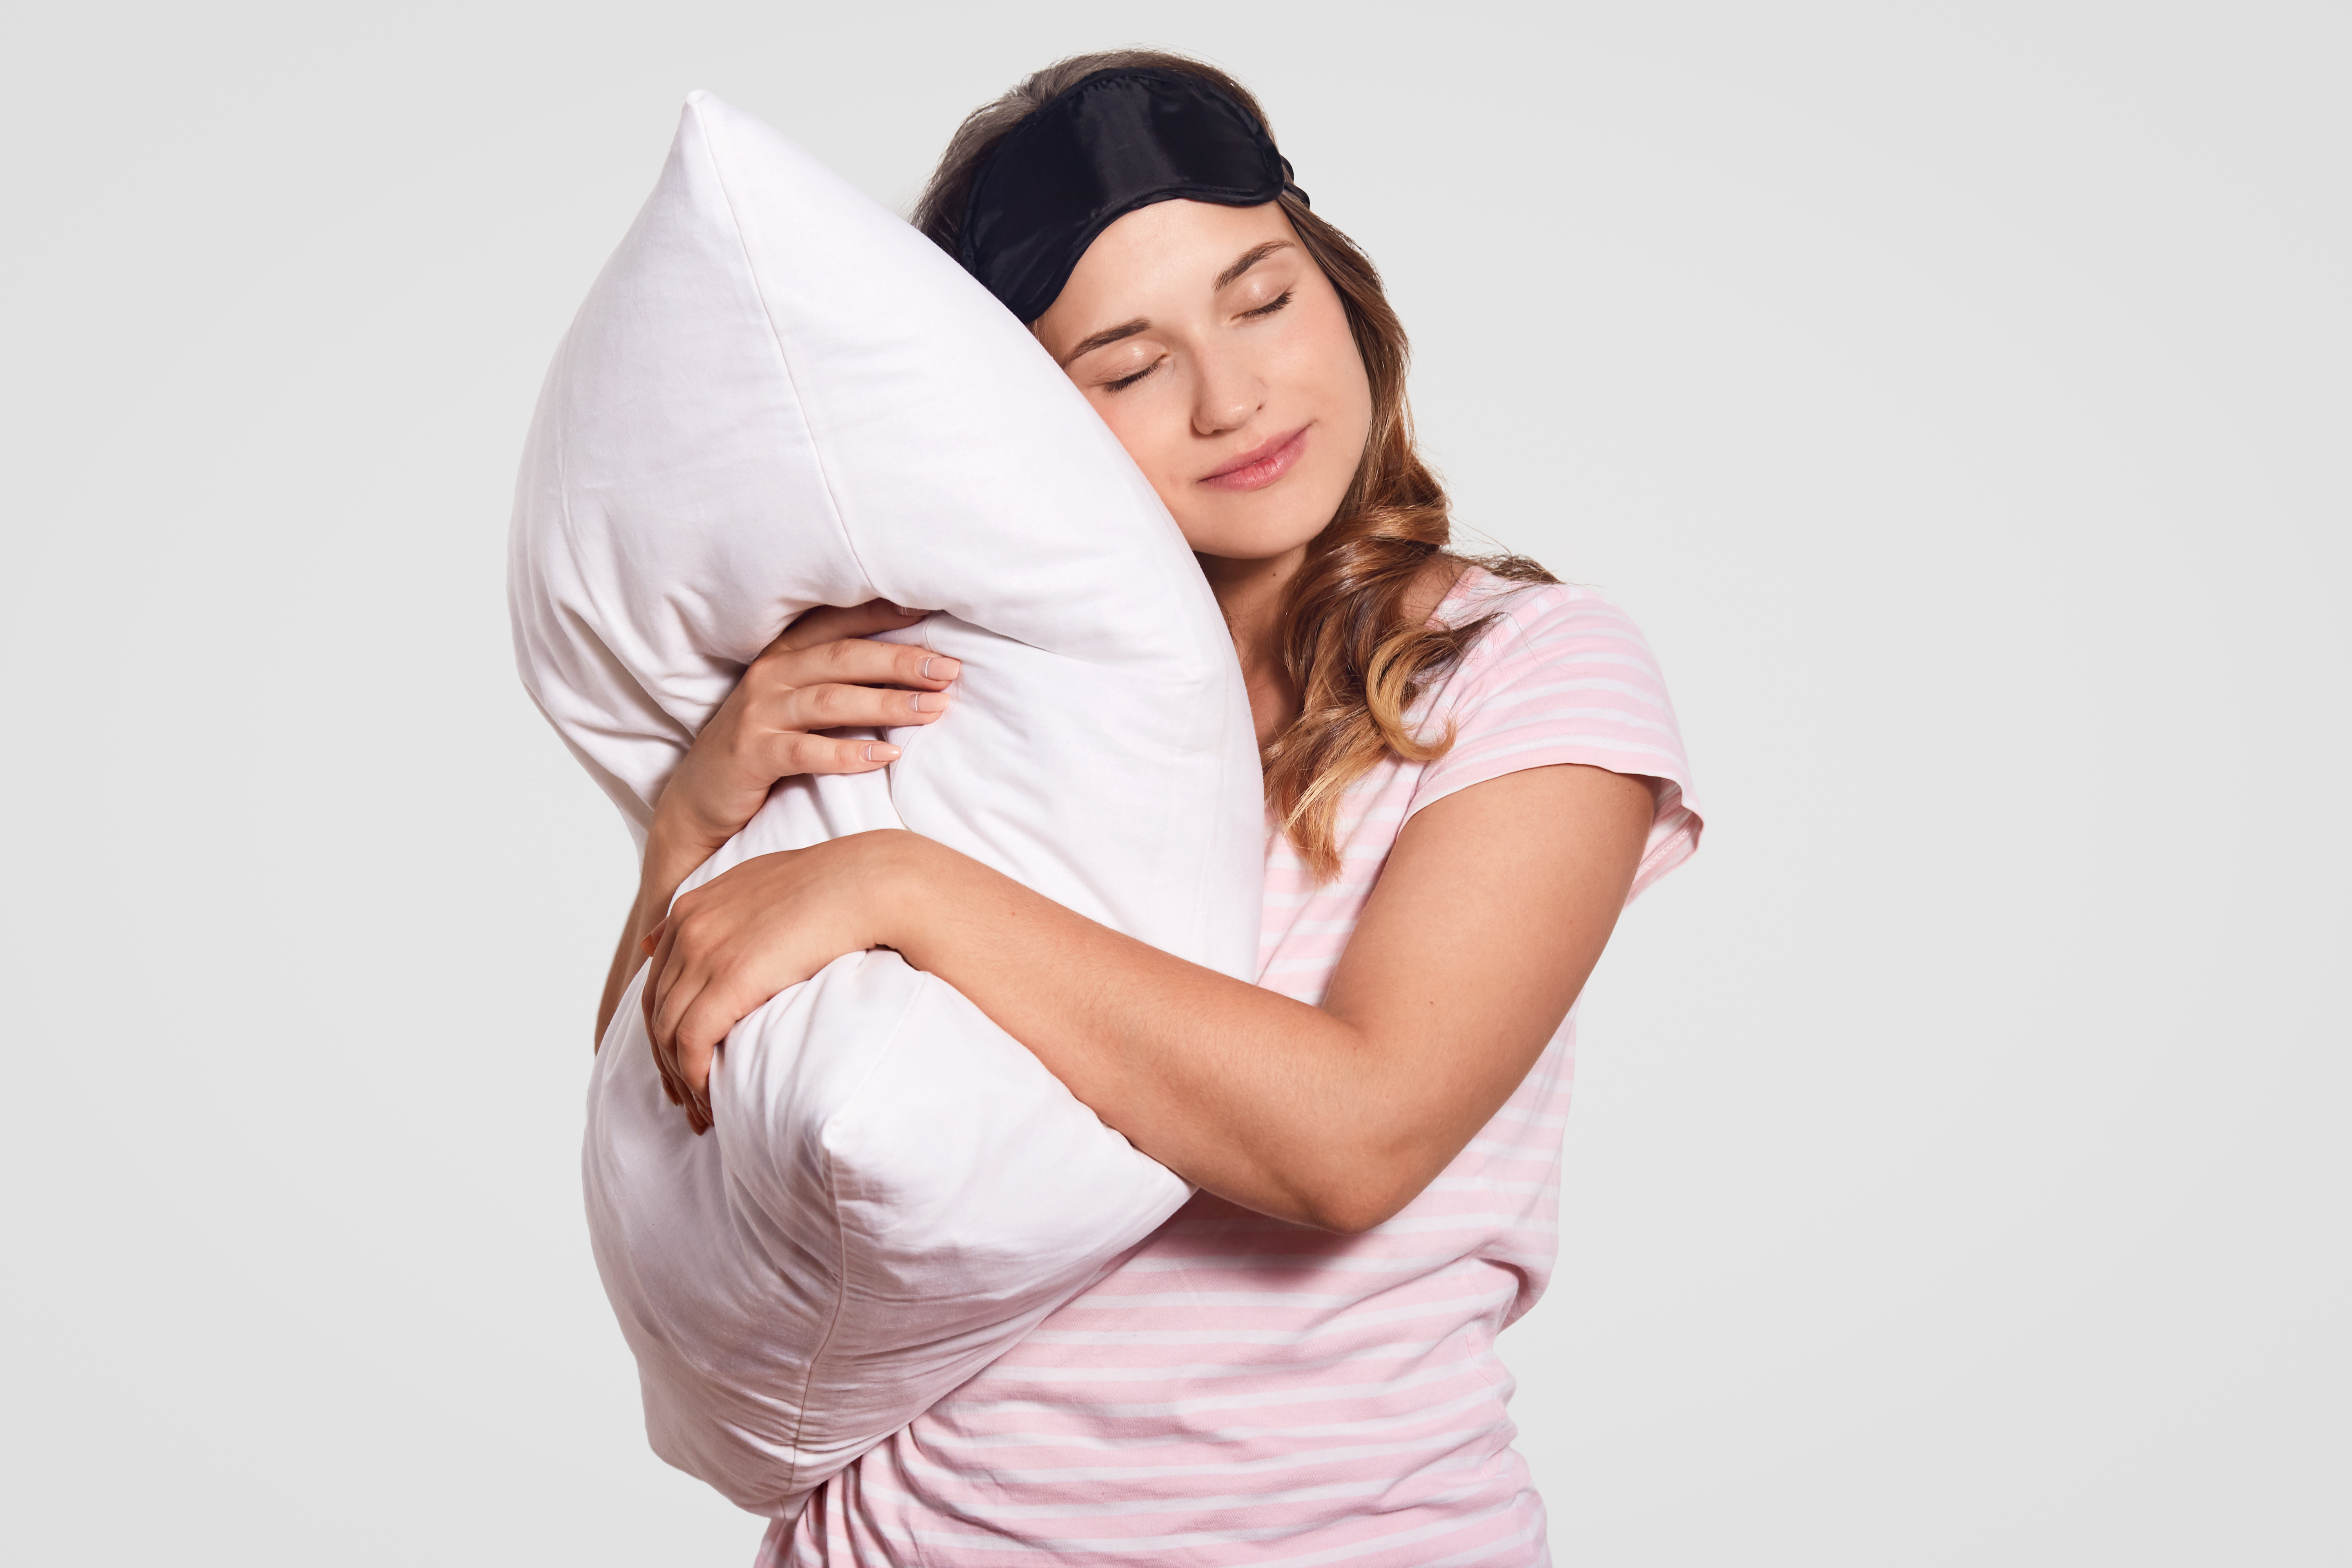 photo-of-european-woman-with-healthy-skin-leans-on-soft-pillow-wears-pyjamas-eyewear-on-head-poses-alone-on-white-has-sleepy-look-people-good-morning-concept